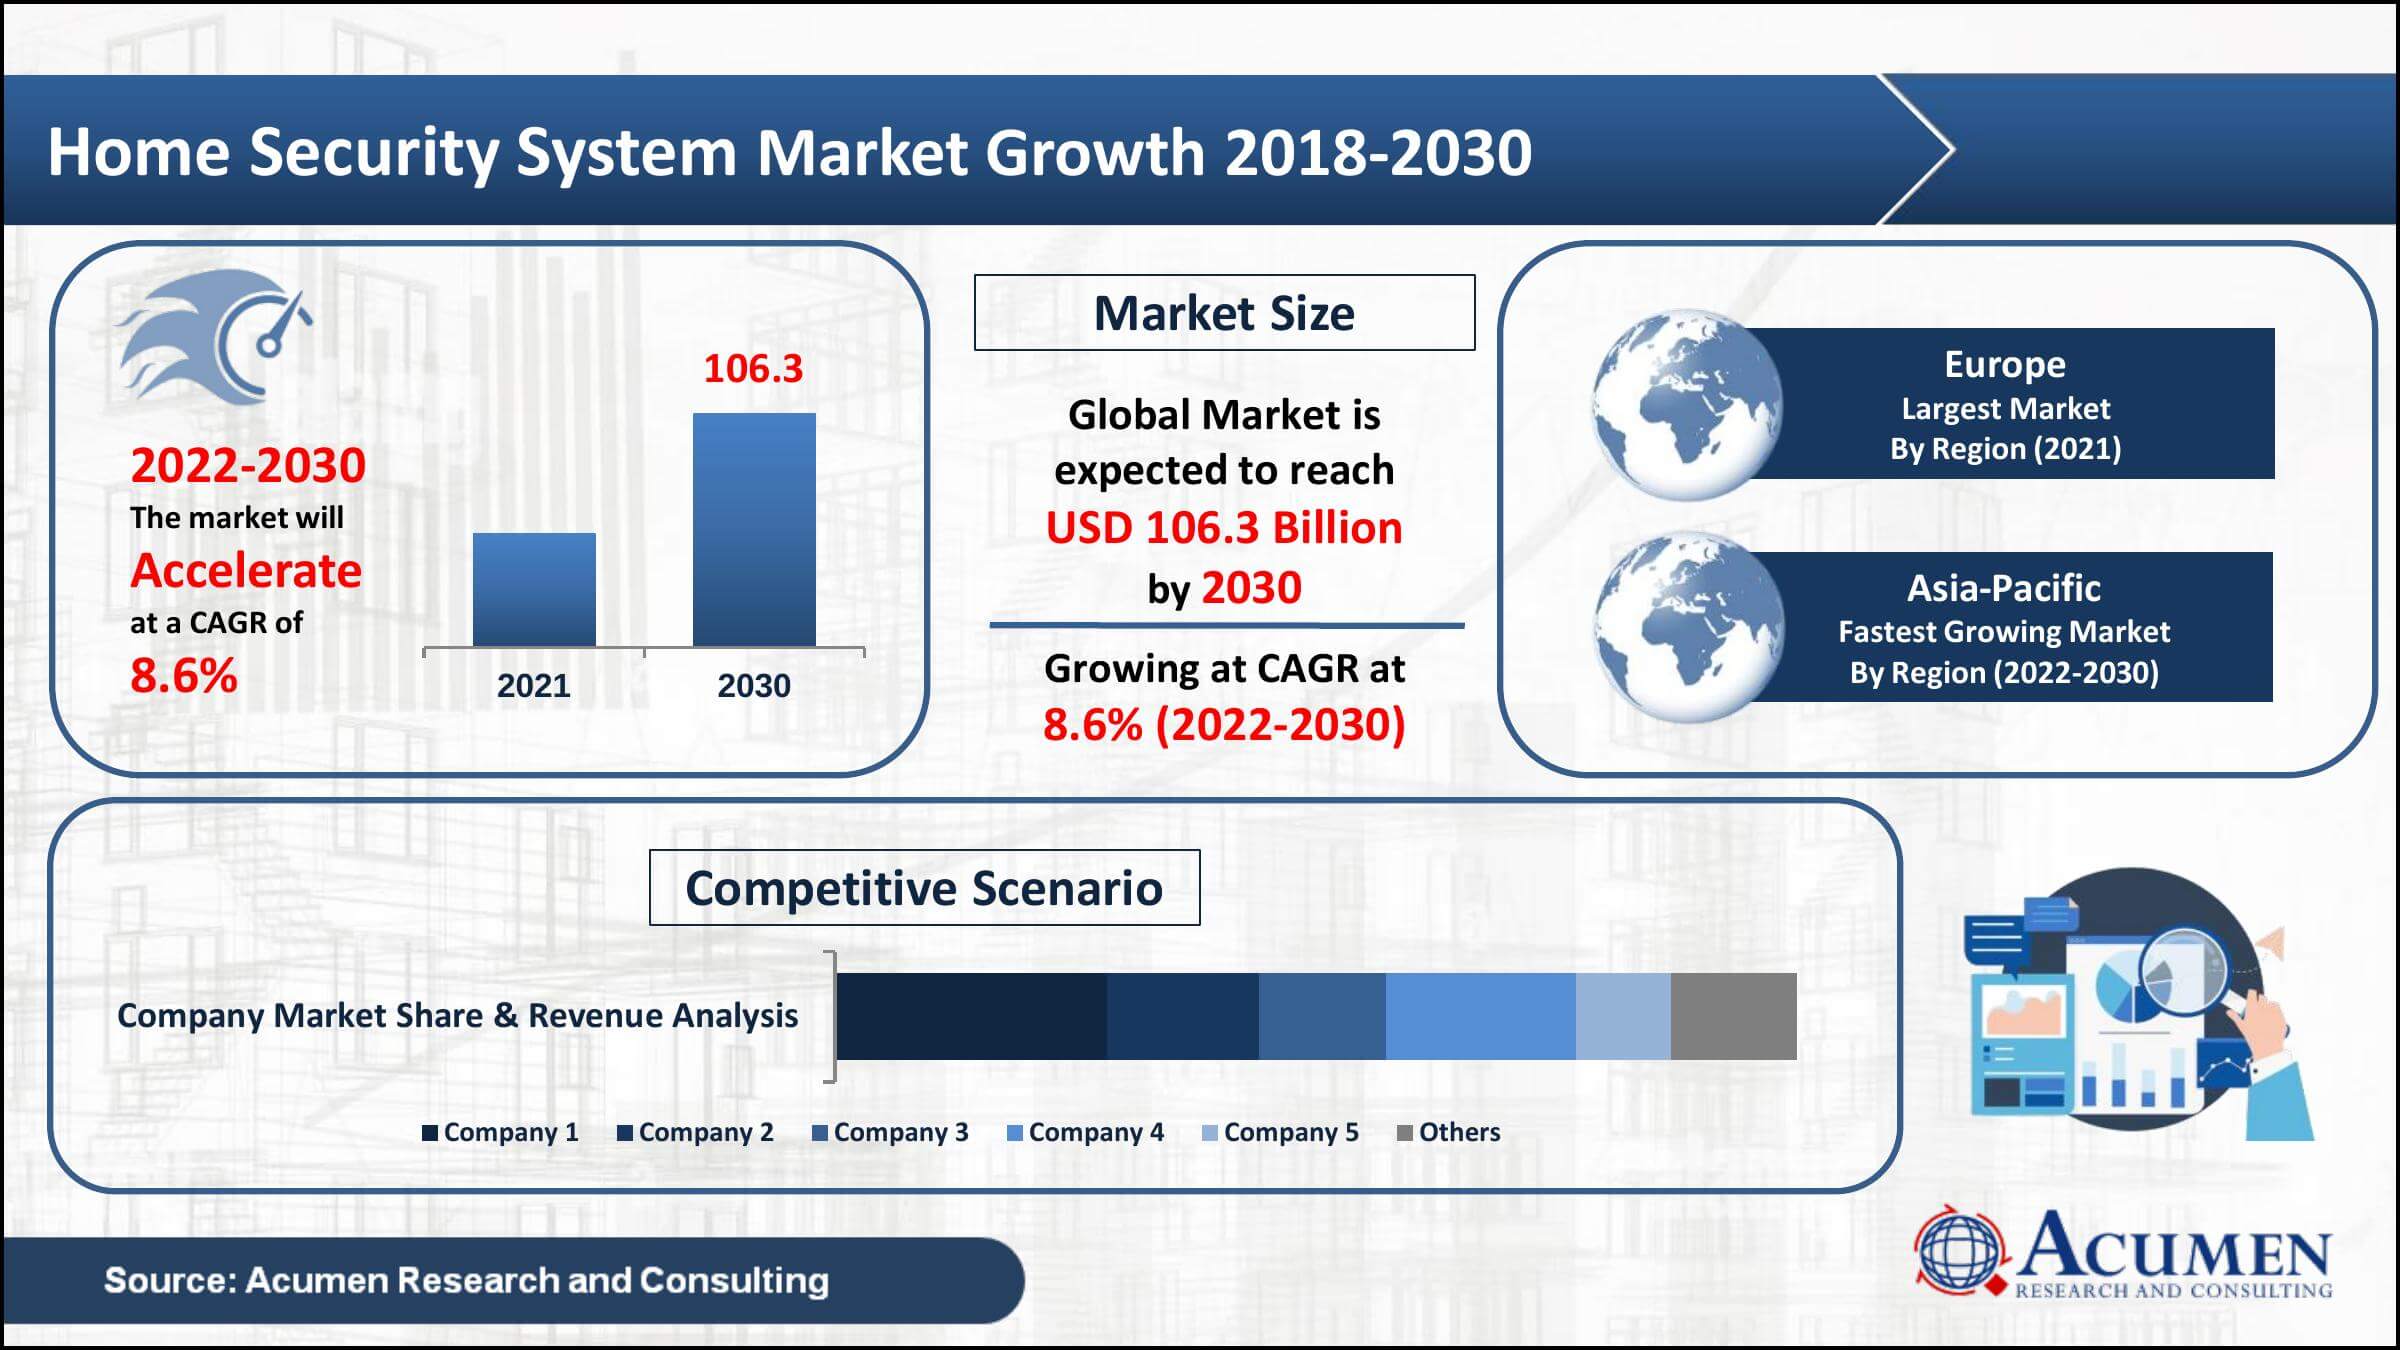 Global home security system market value collected USD 51.9 Billion in 2021, with an 8.6% CAGR between 2022 and 2030